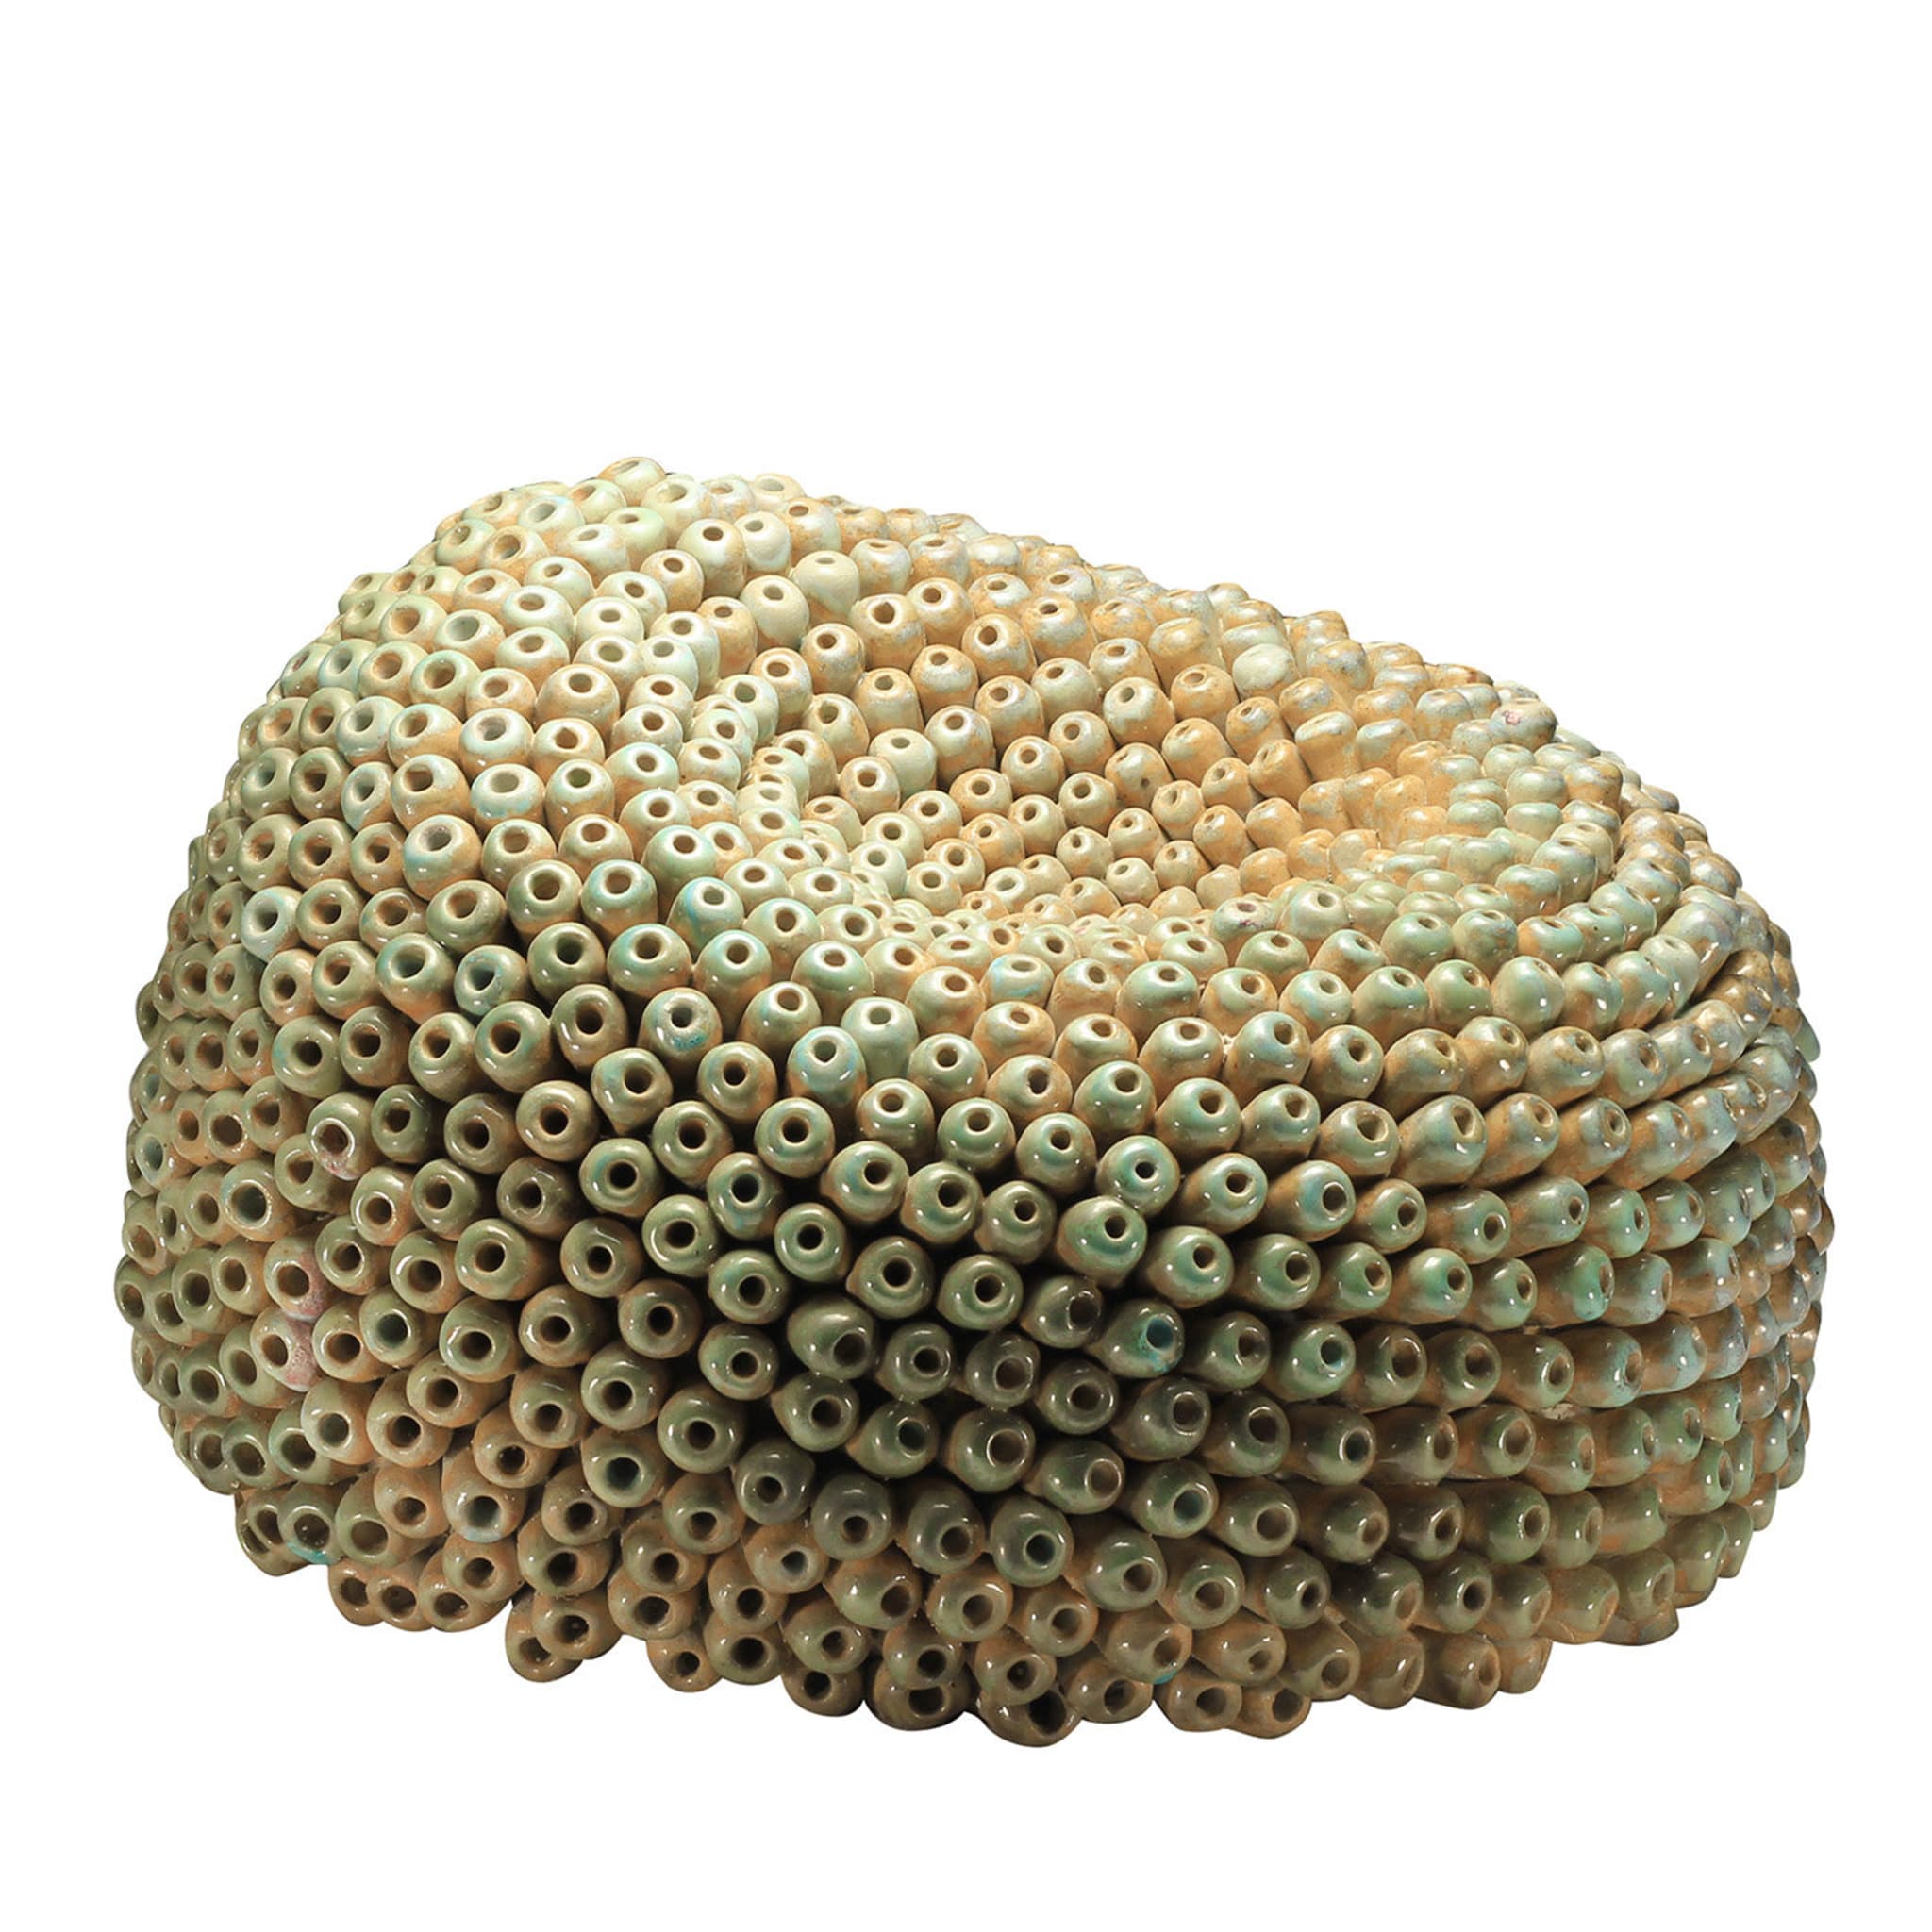 Coral Formation 1 Sculpture - Main view